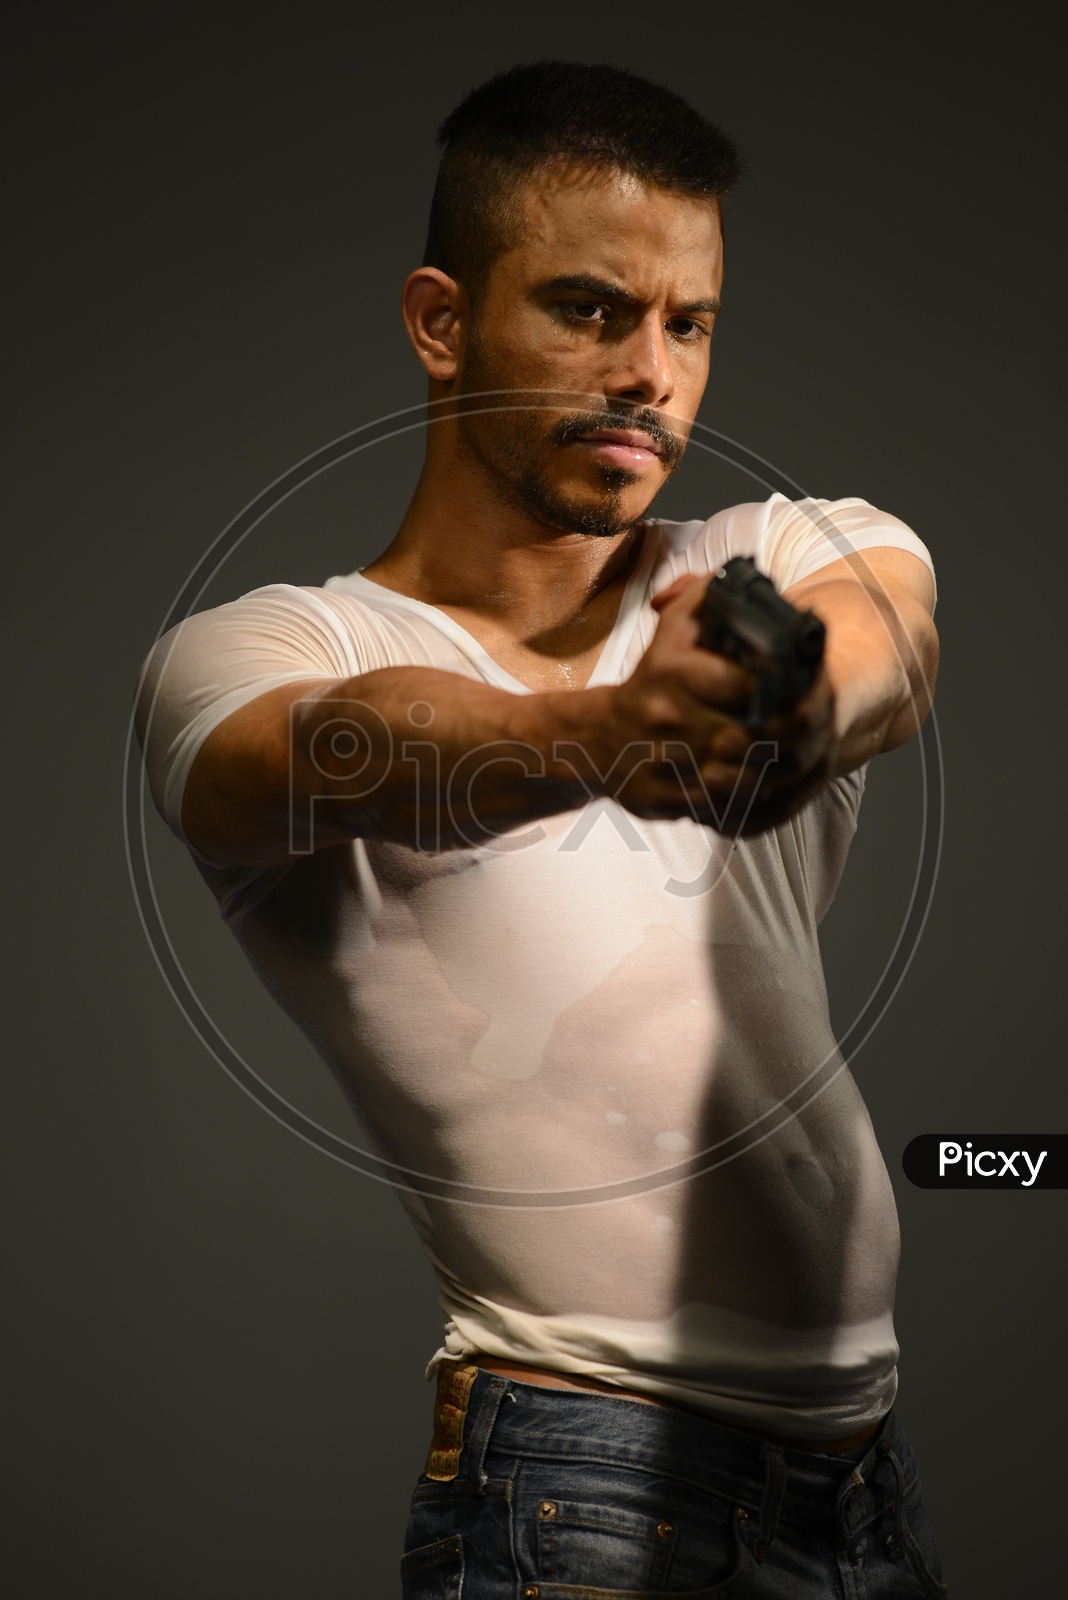 Indian Muscular Man aiming with a pistol